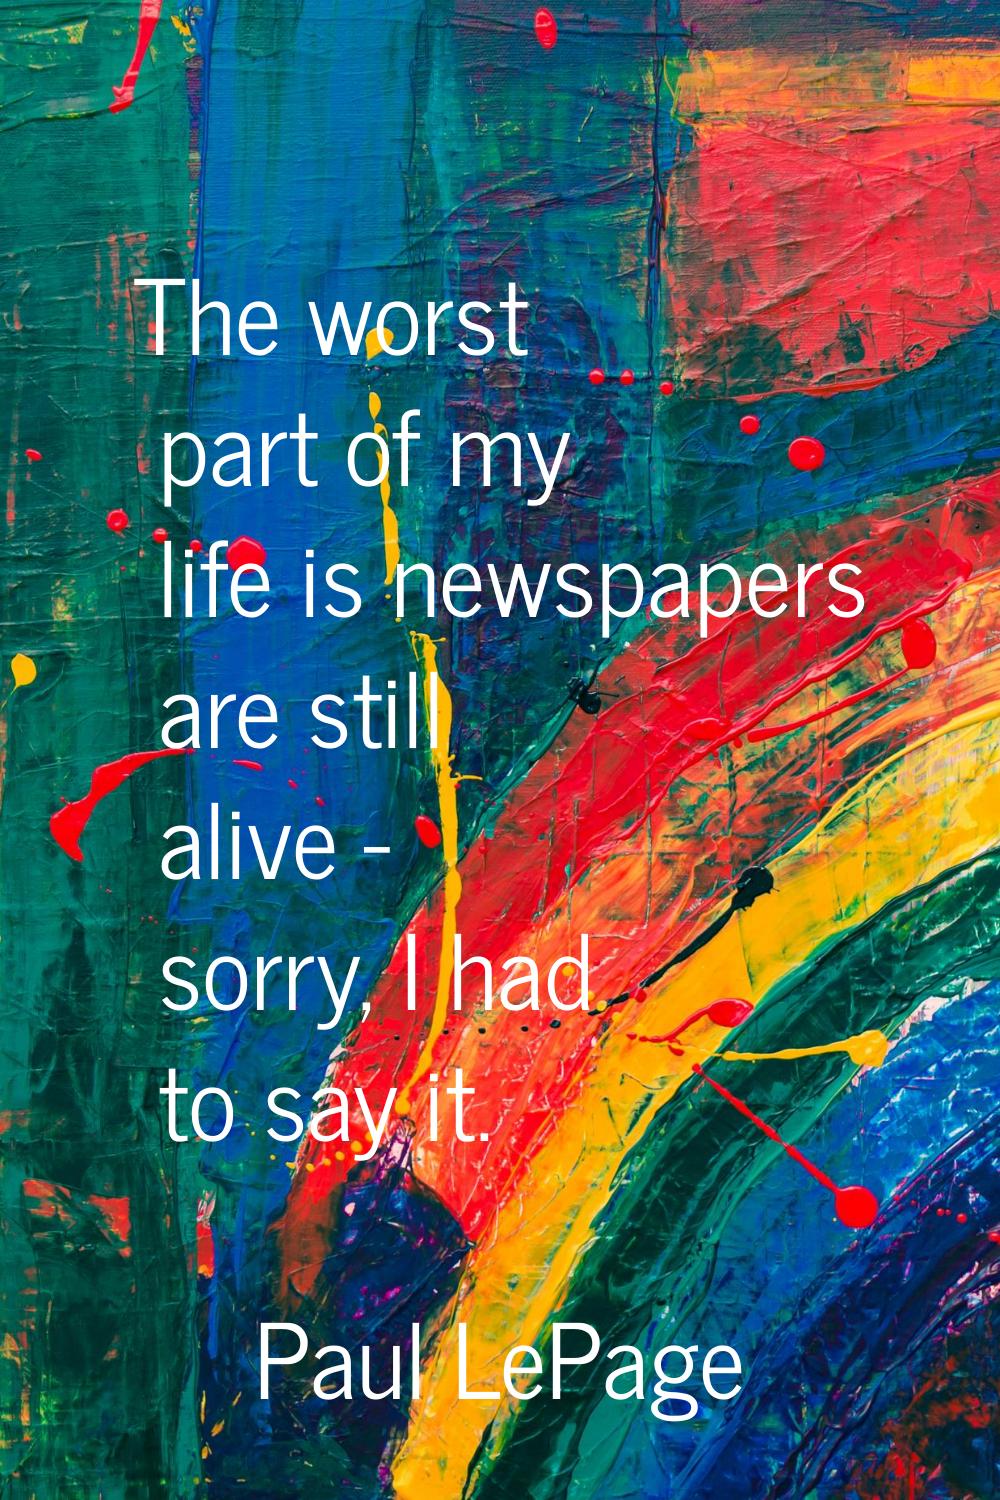 The worst part of my life is newspapers are still alive - sorry, I had to say it.